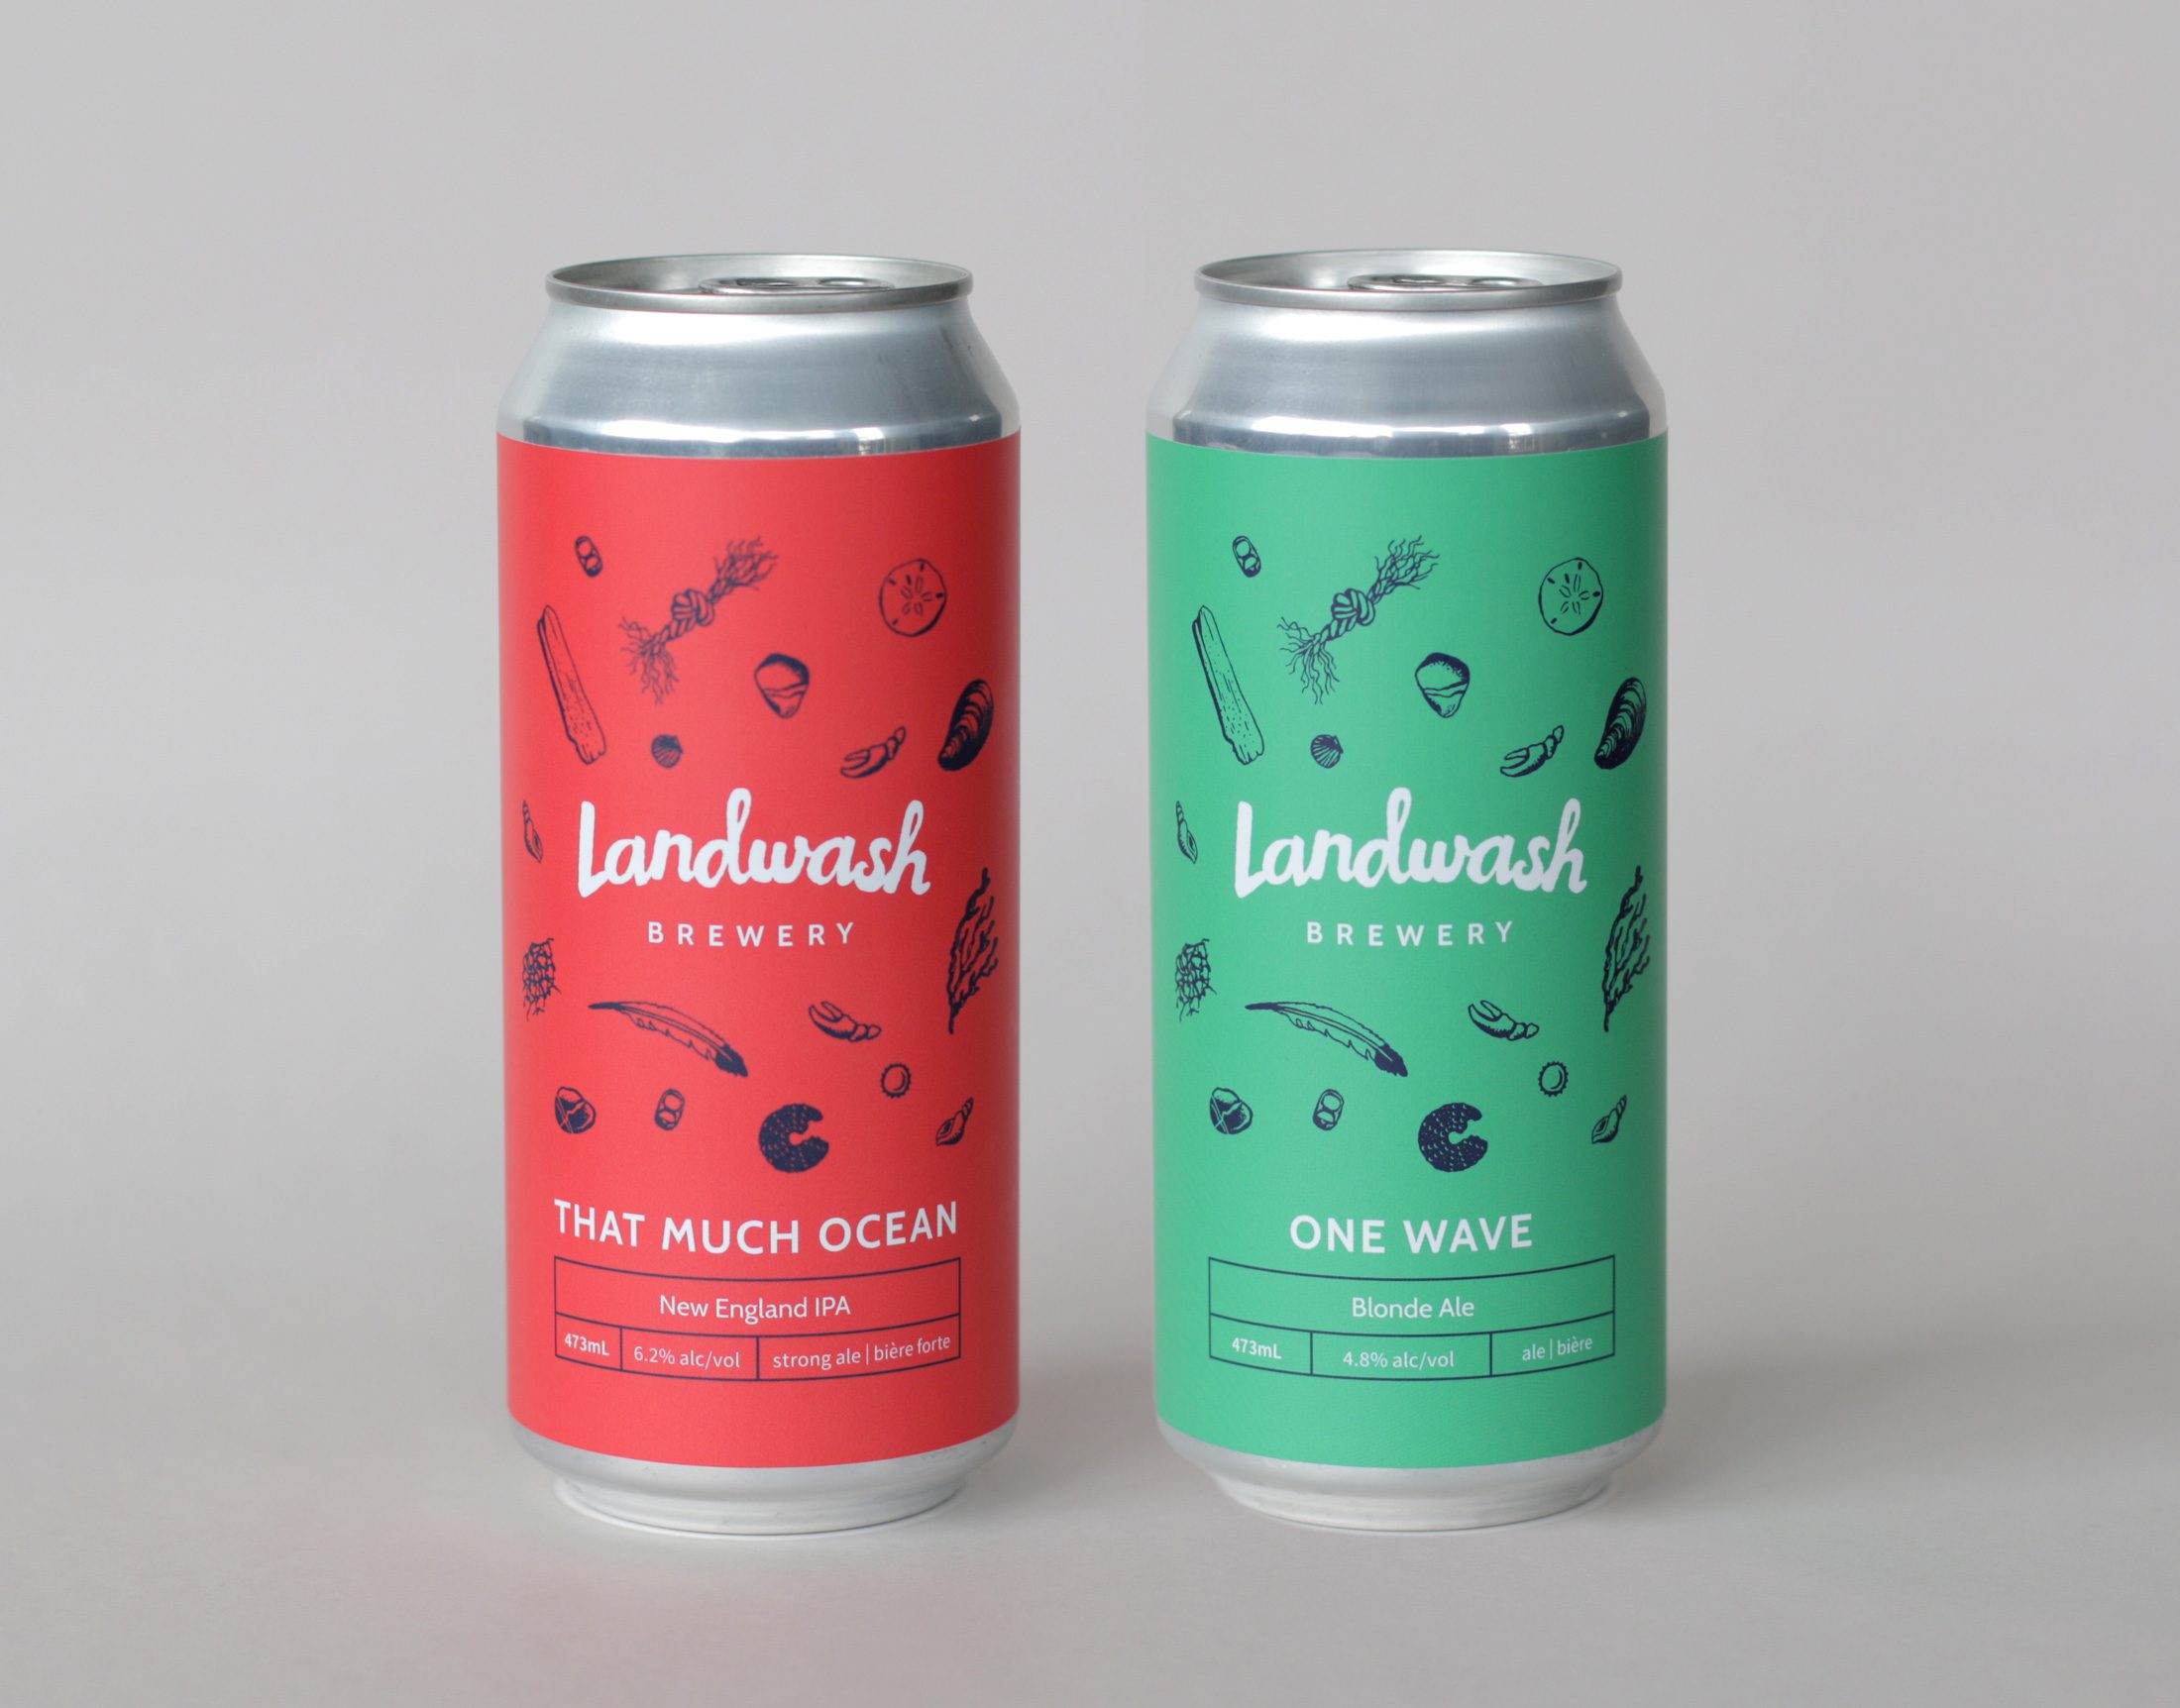 Two cans of Landwash beer on a grey background